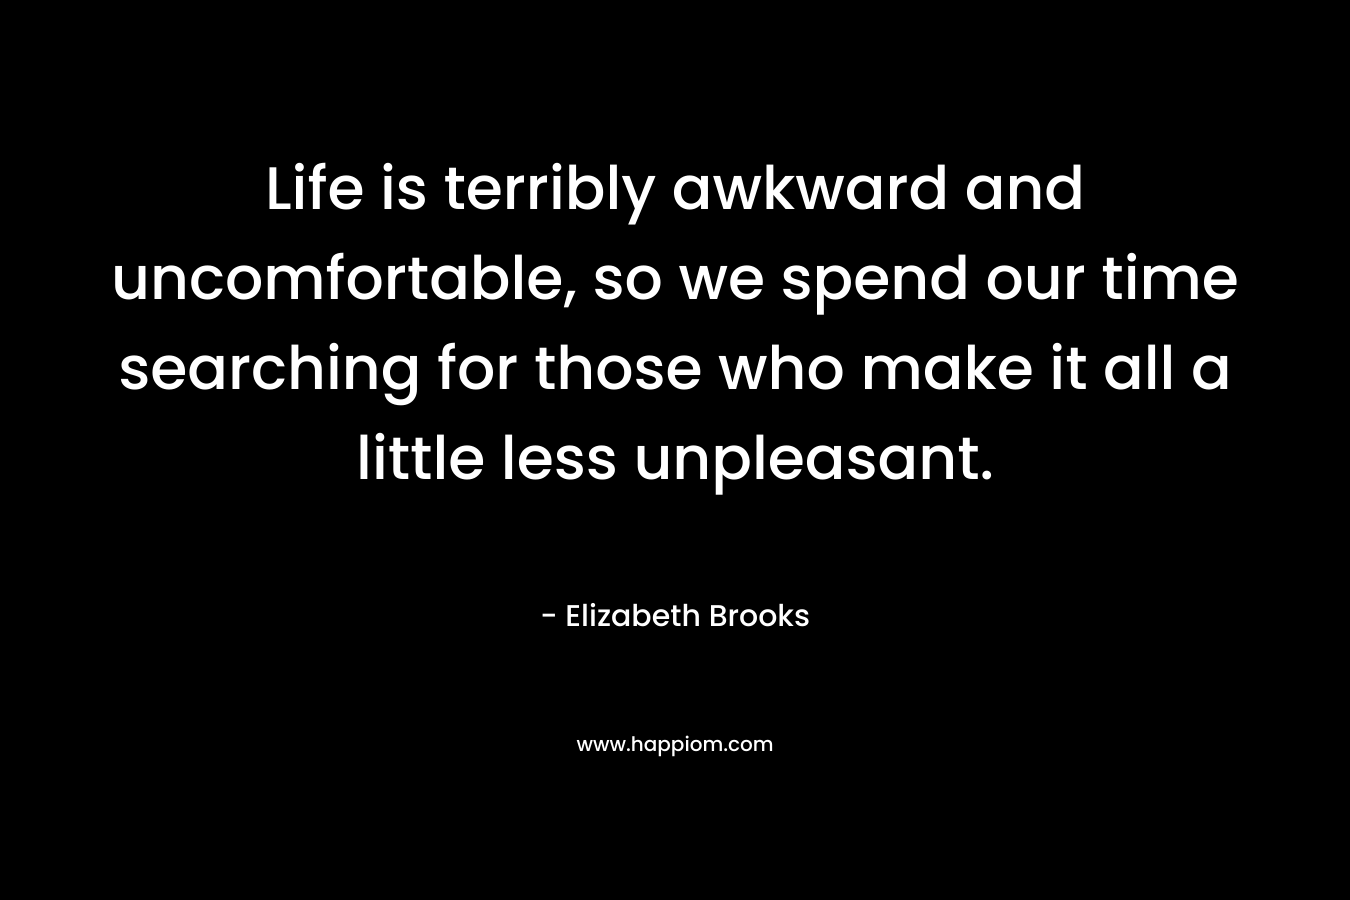 Life is terribly awkward and uncomfortable, so we spend our time searching for those who make it all a little less unpleasant. – Elizabeth Brooks